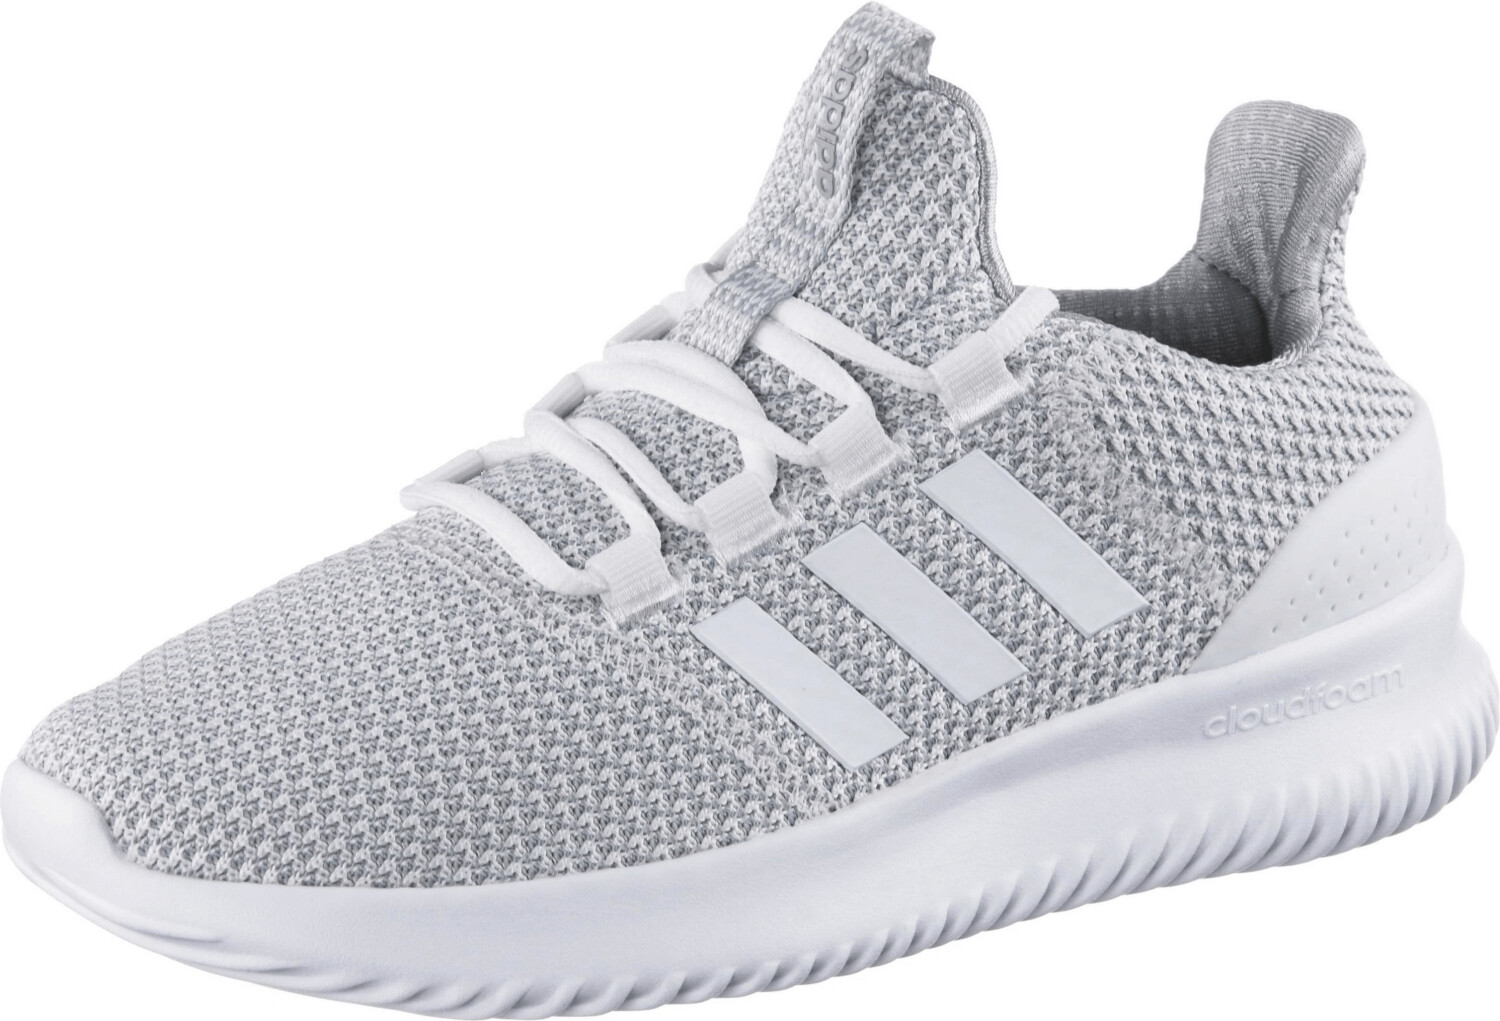 Buy Adidas Cloudfoam Ultimate K from £24.99 (Today) – Best Deals on  idealo.co.uk